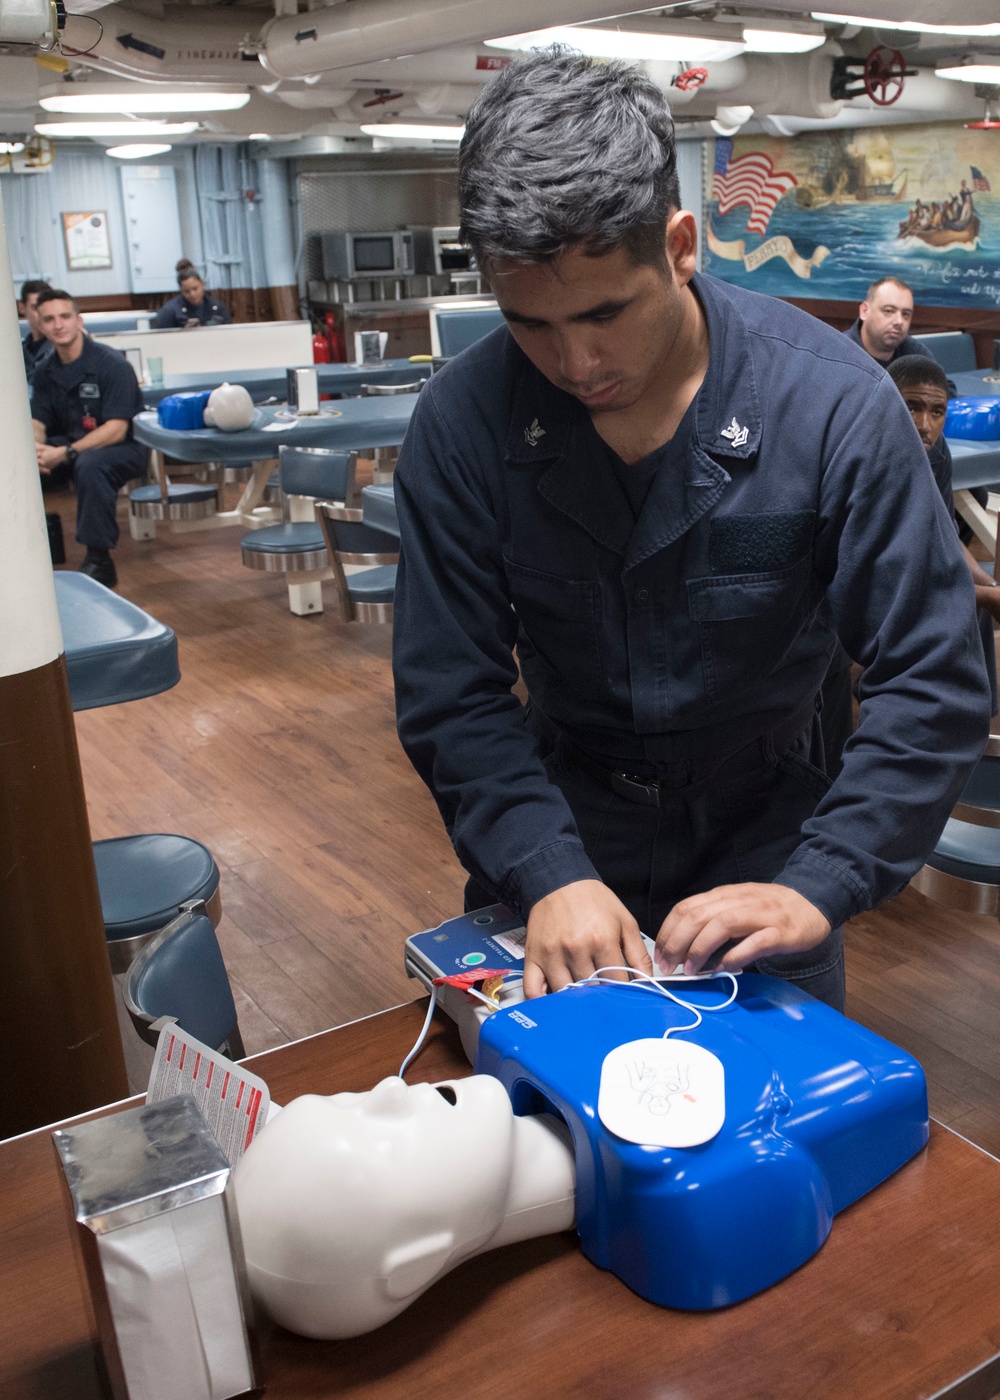 USS Lake Erie (CG 70) HT2 completes CPR training